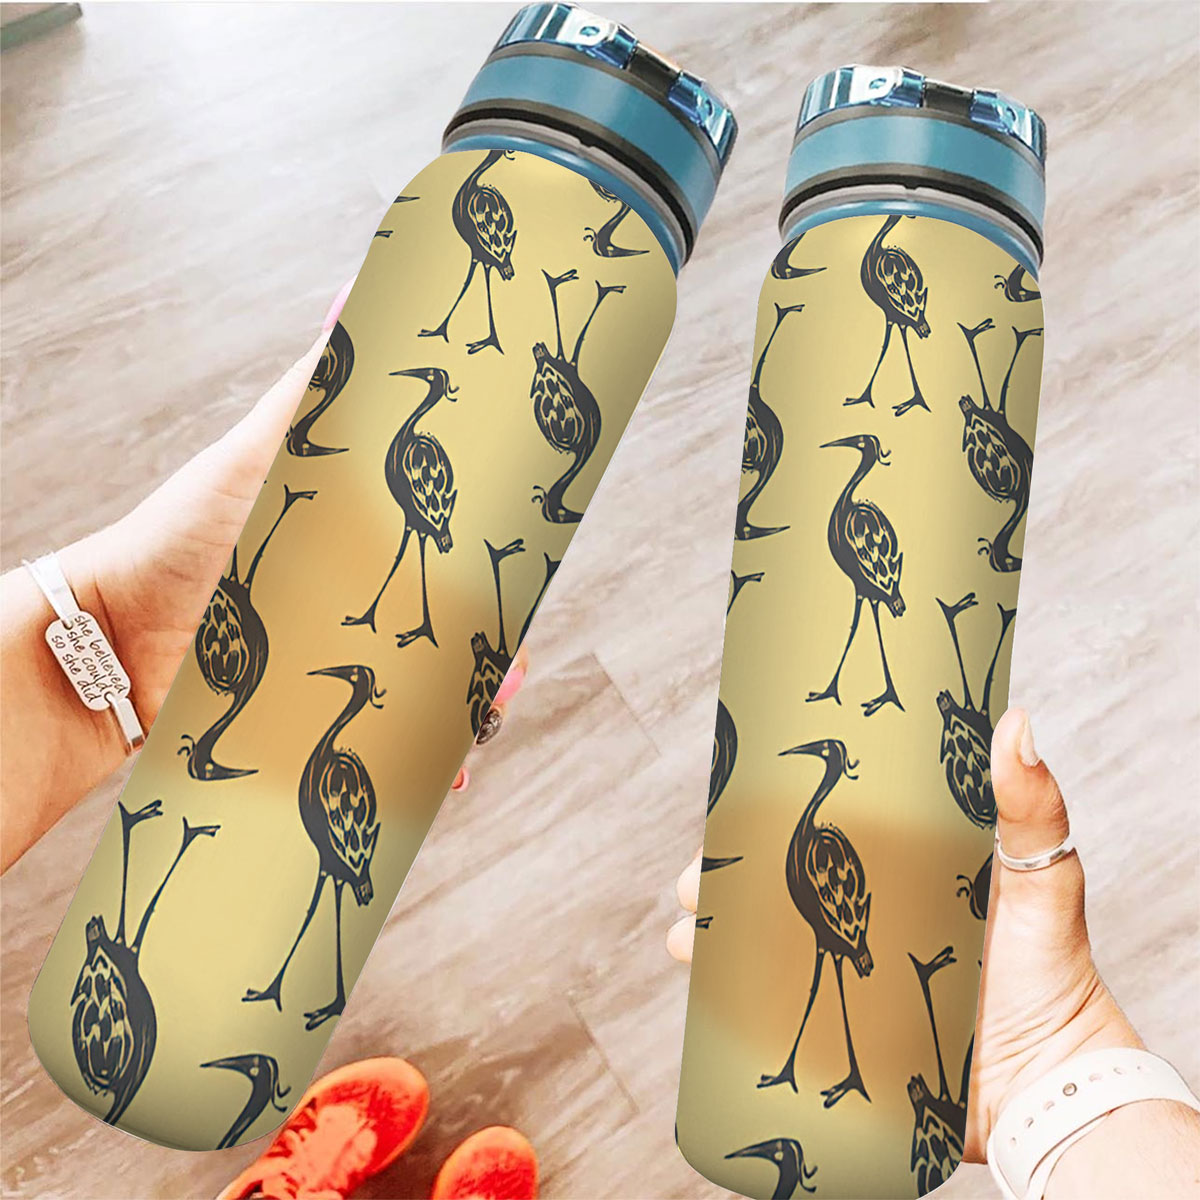 Up And Down Heron Art Tracker Bottle